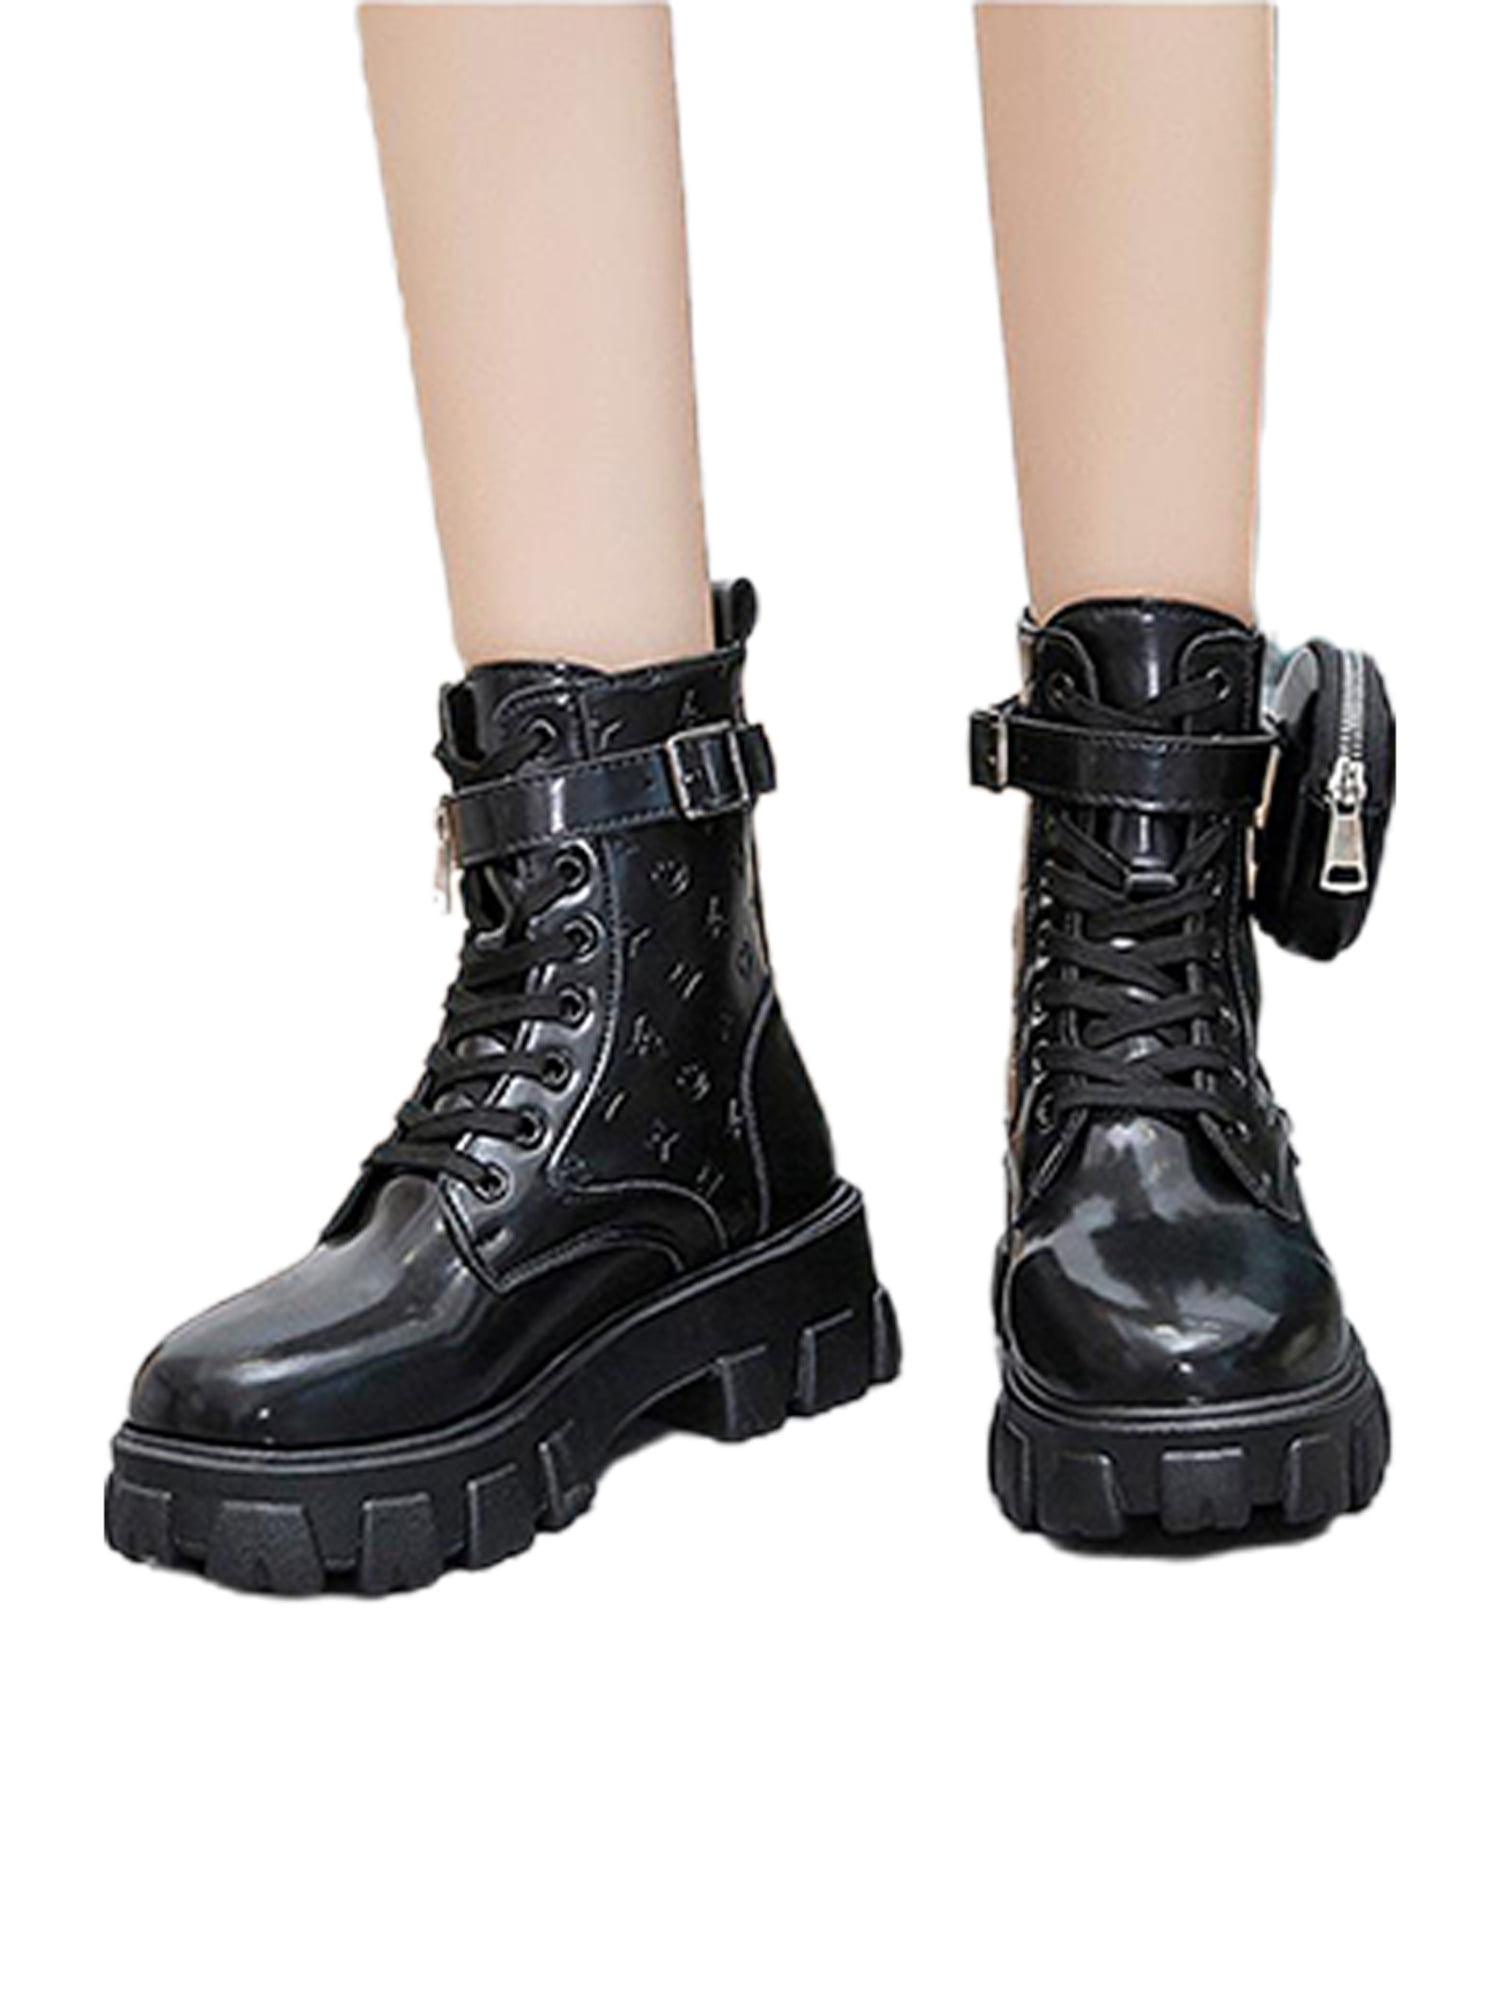 Women Chunky Heel Ladies Combat Motor Shoes Buckle Strap Platform Ankle Boots 